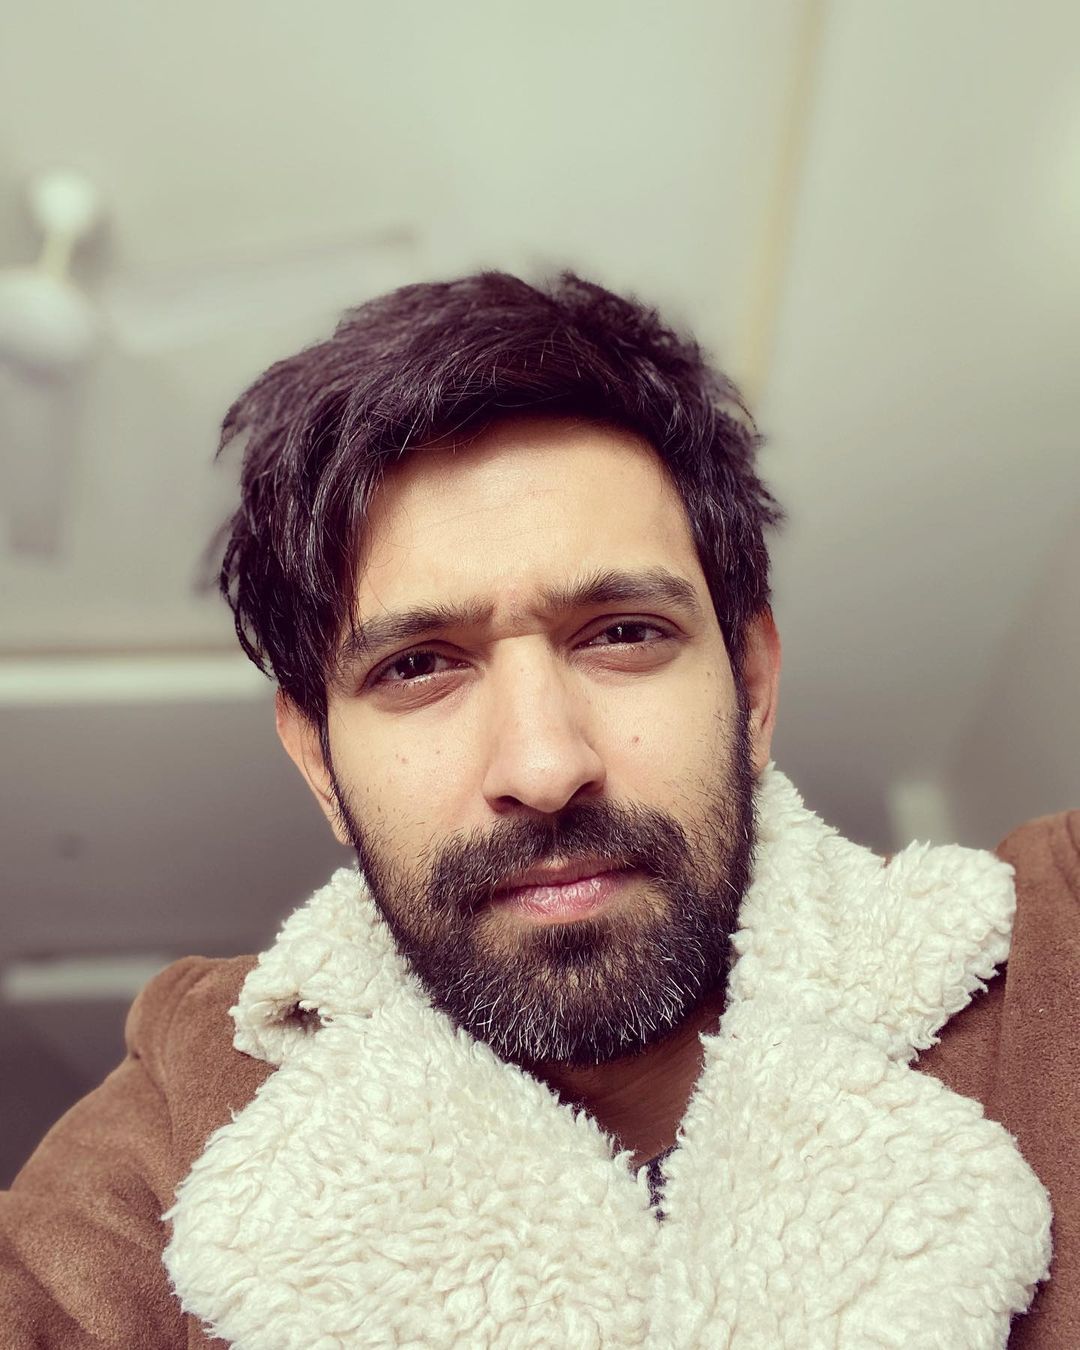 Vikrant Massey Called A 'Misogynist' On Twitter After He Calls Parliamentarians 'Dainty Little Princesses'; Actor Responds